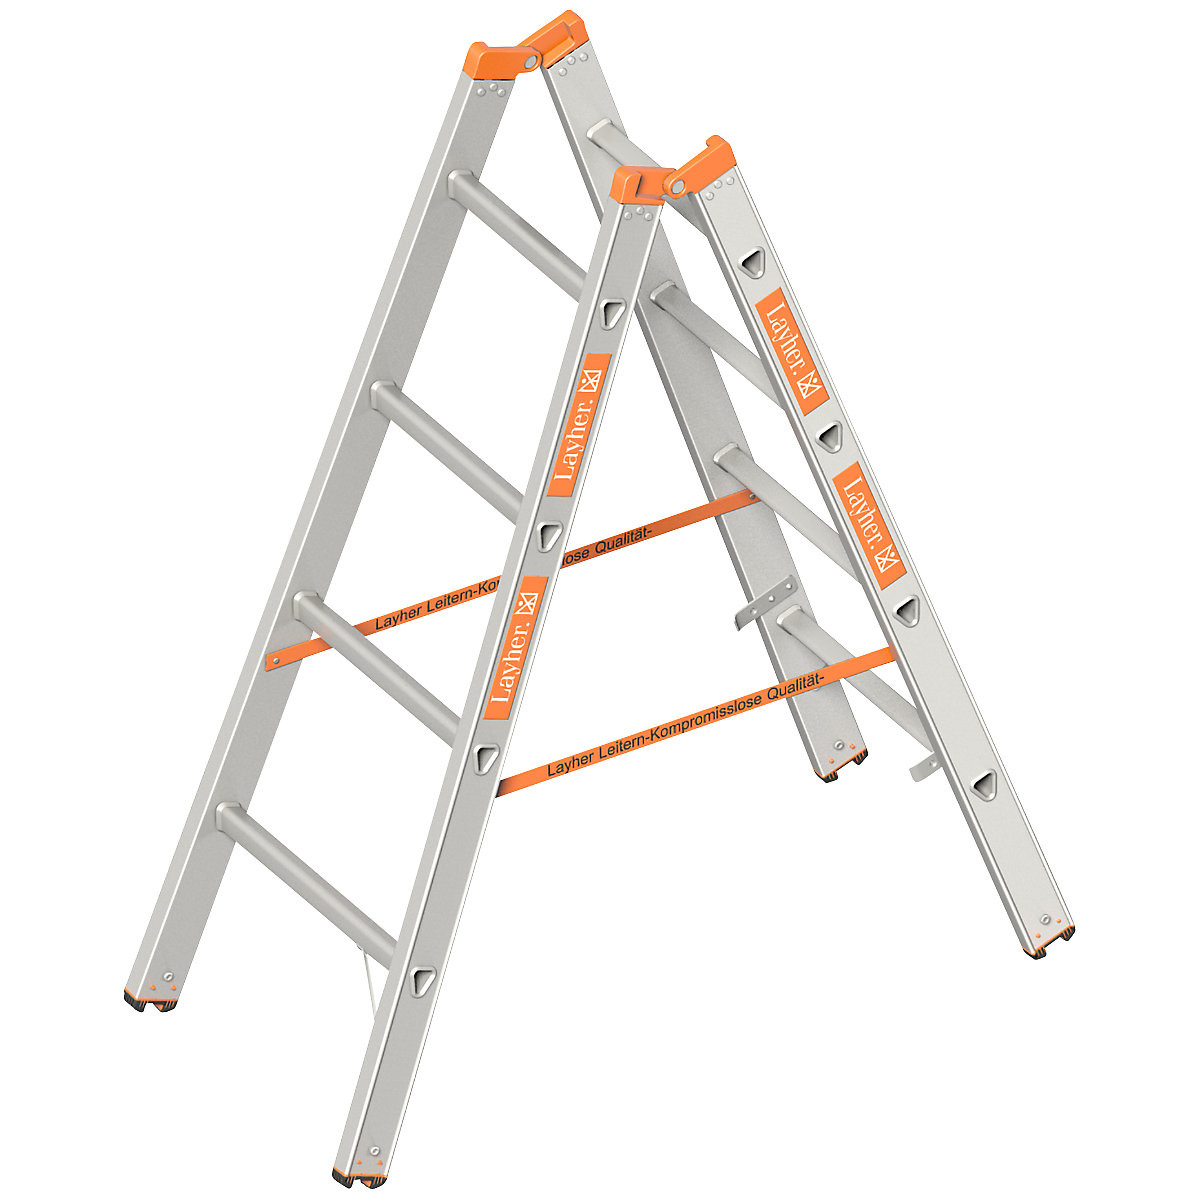 Double sided rung ladder – Layher